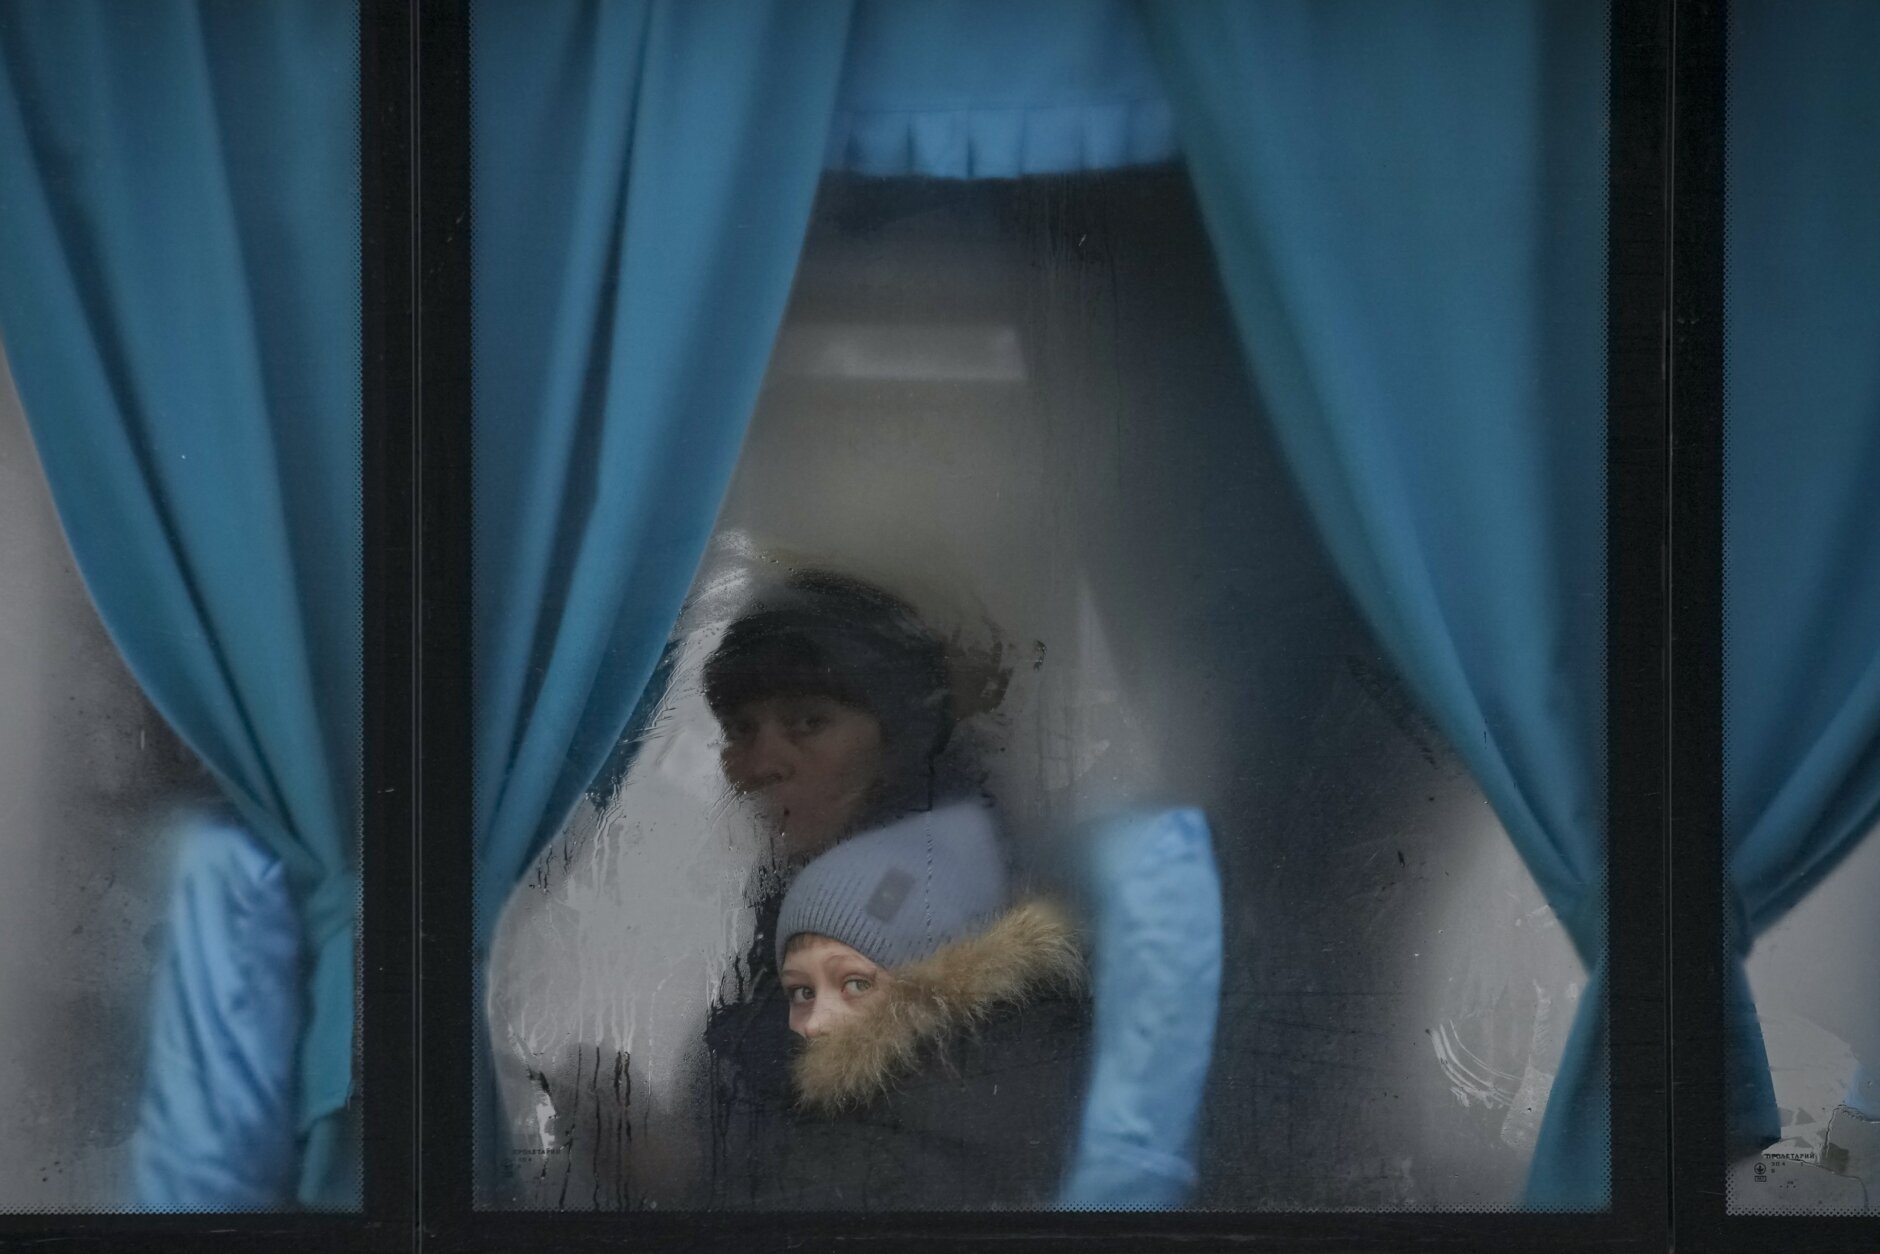 A woman and child peer out of the window of a bus as they leave Sievierodonetsk, the Luhansk region, in eastern Ukraine, Thursday, Feb. 24, 2022. (AP Photo/Vadim Ghirda)